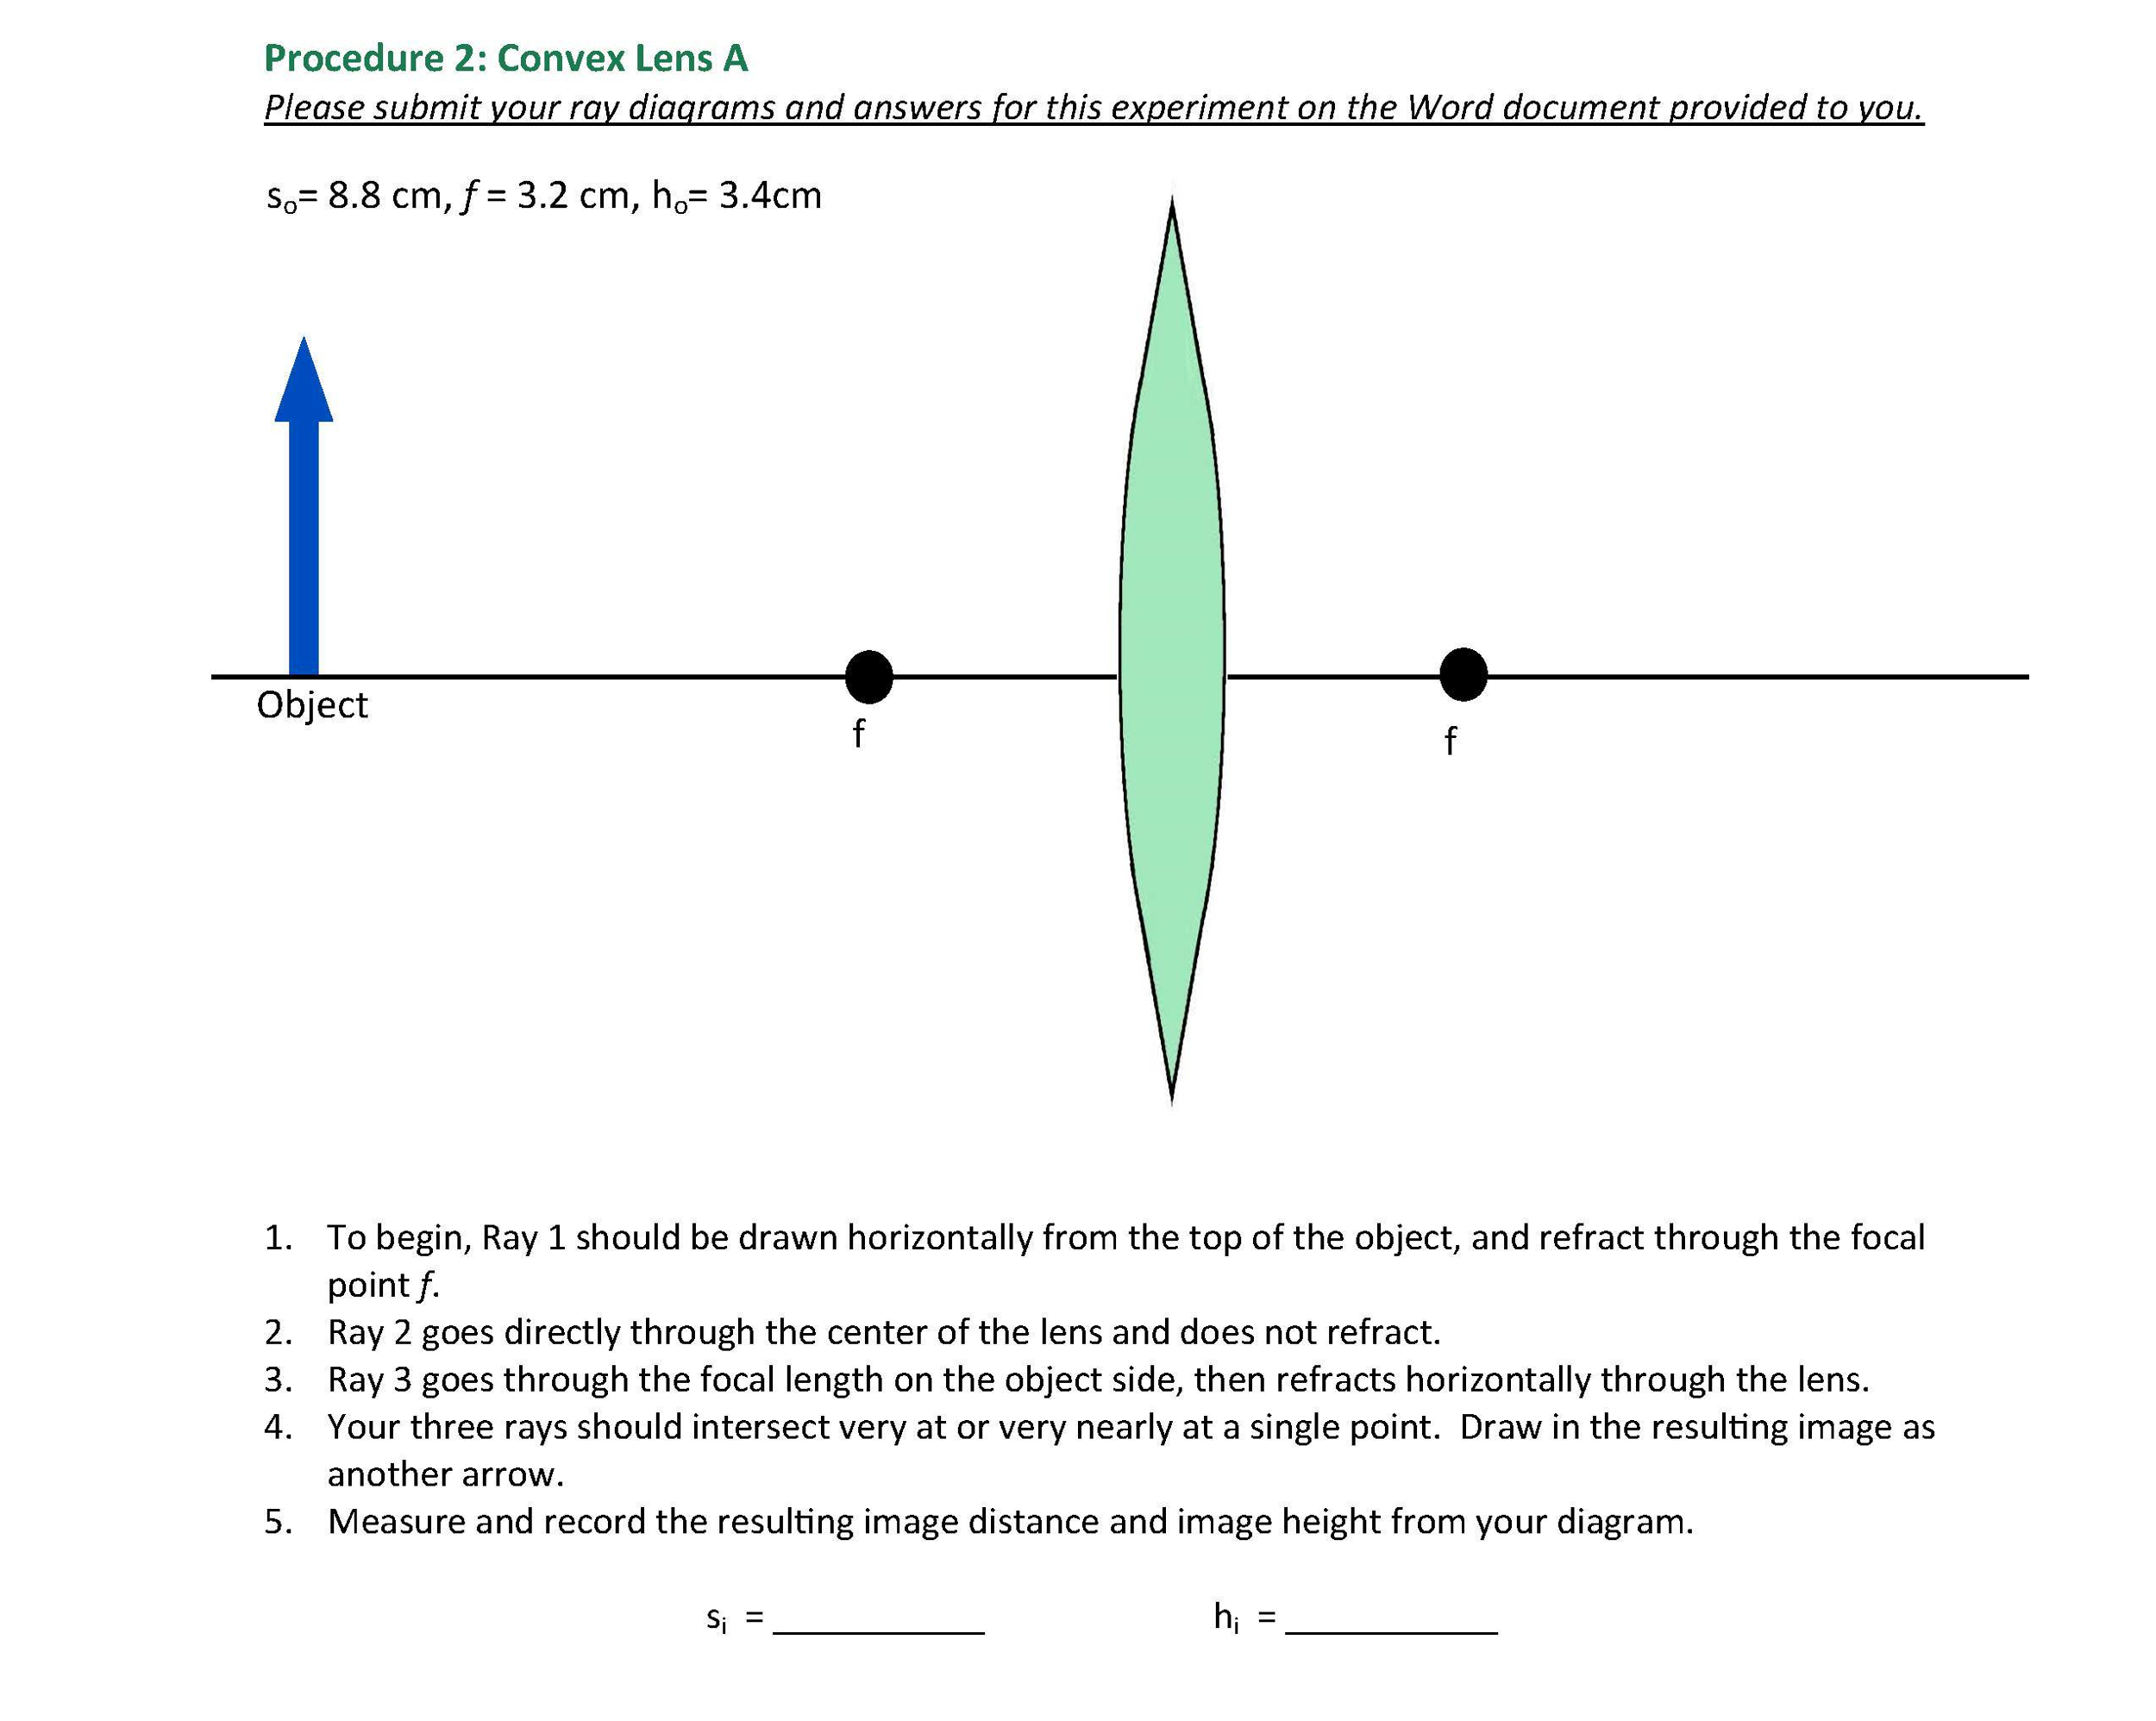 Draw a ray diagram to show the formation of an image when the object is  placed anywhere in front of a concave lens.